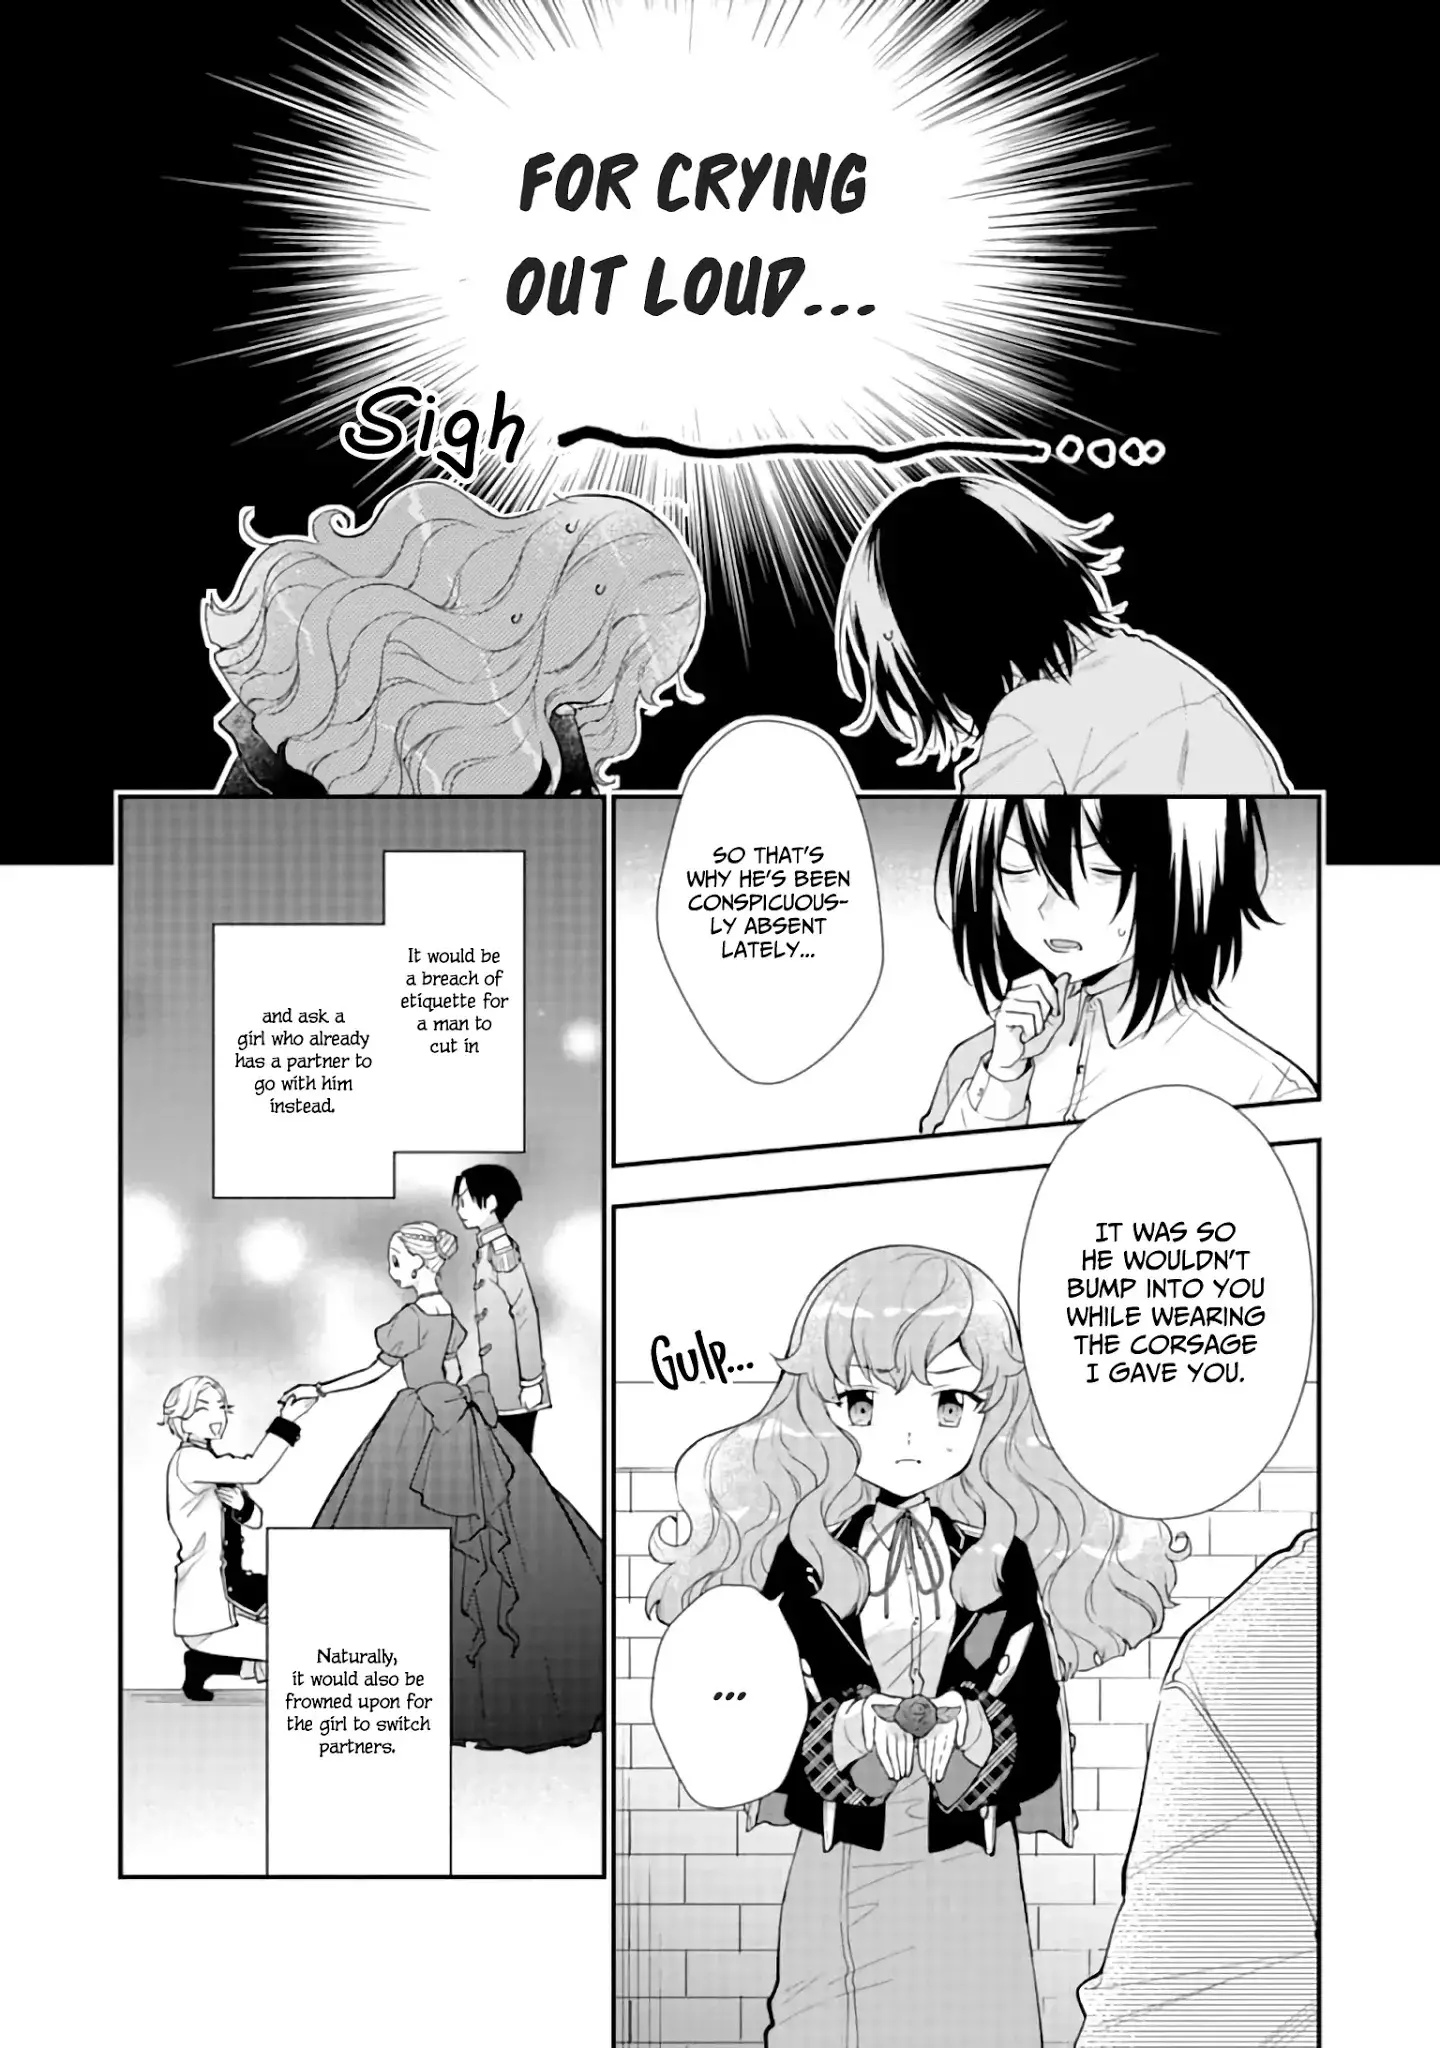 The Noble Girl With A Crush On A Plain And Studious Guy Finds The Arrogant Prince To Be A Nuisance - 4 page 54